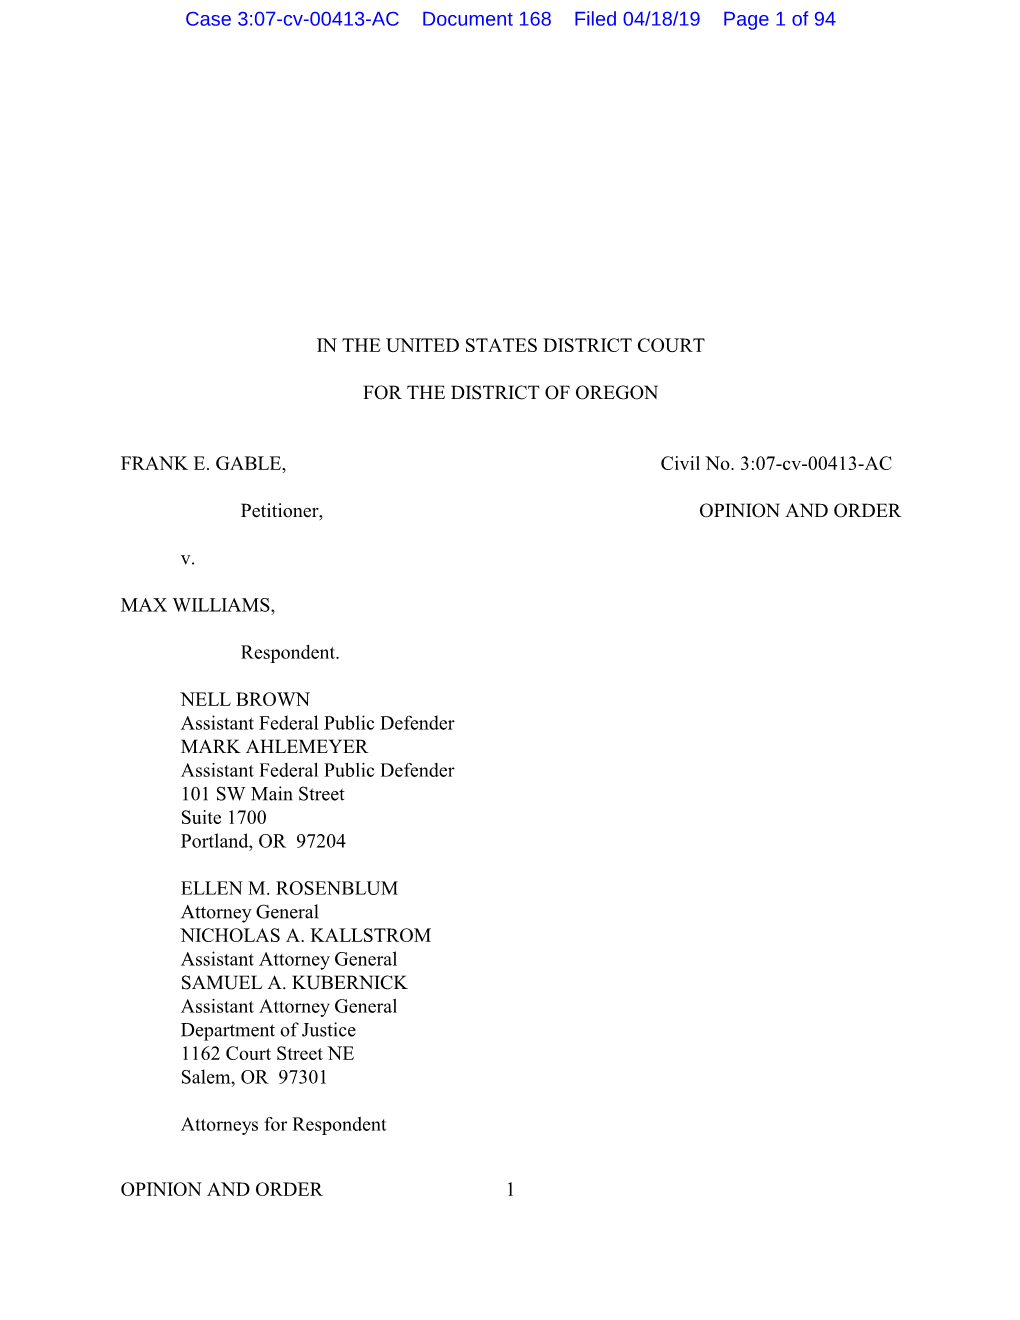 Case 3:07-Cv-00413-AC Document 168 Filed 04/18/19 Page 1 of 94